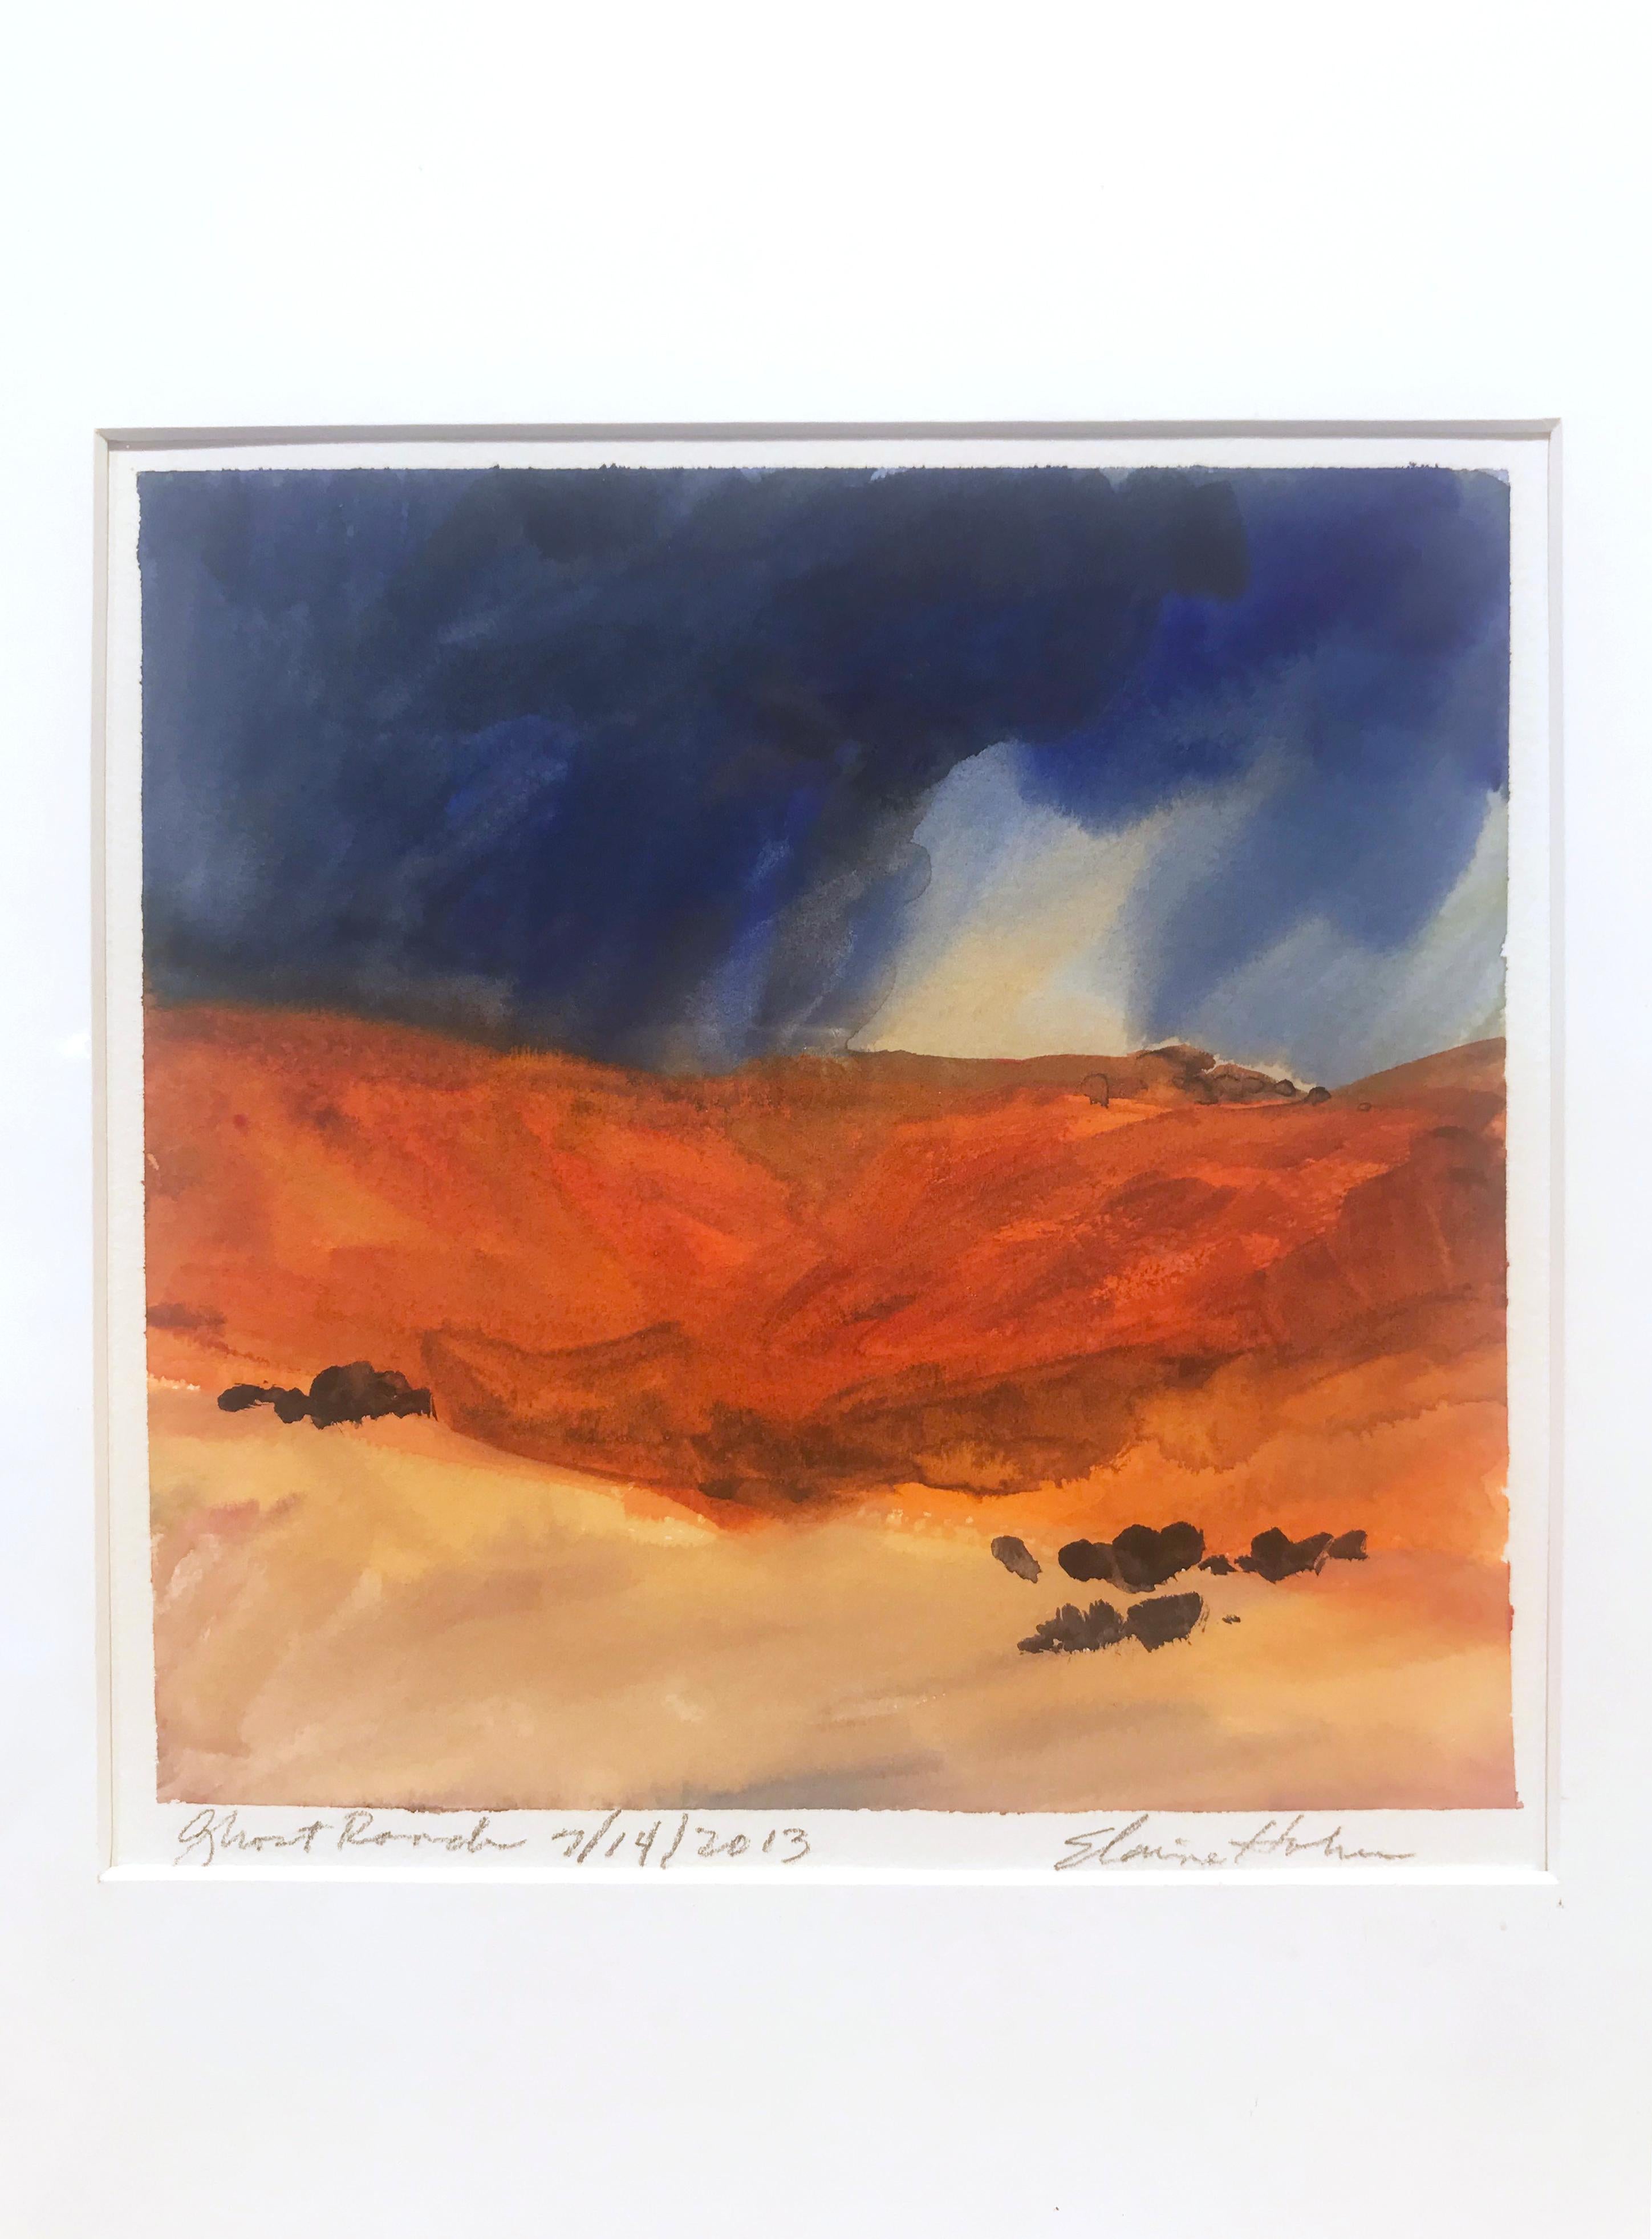 Ghost Ranch 7/14/2013  - Painting by Elaine Holien